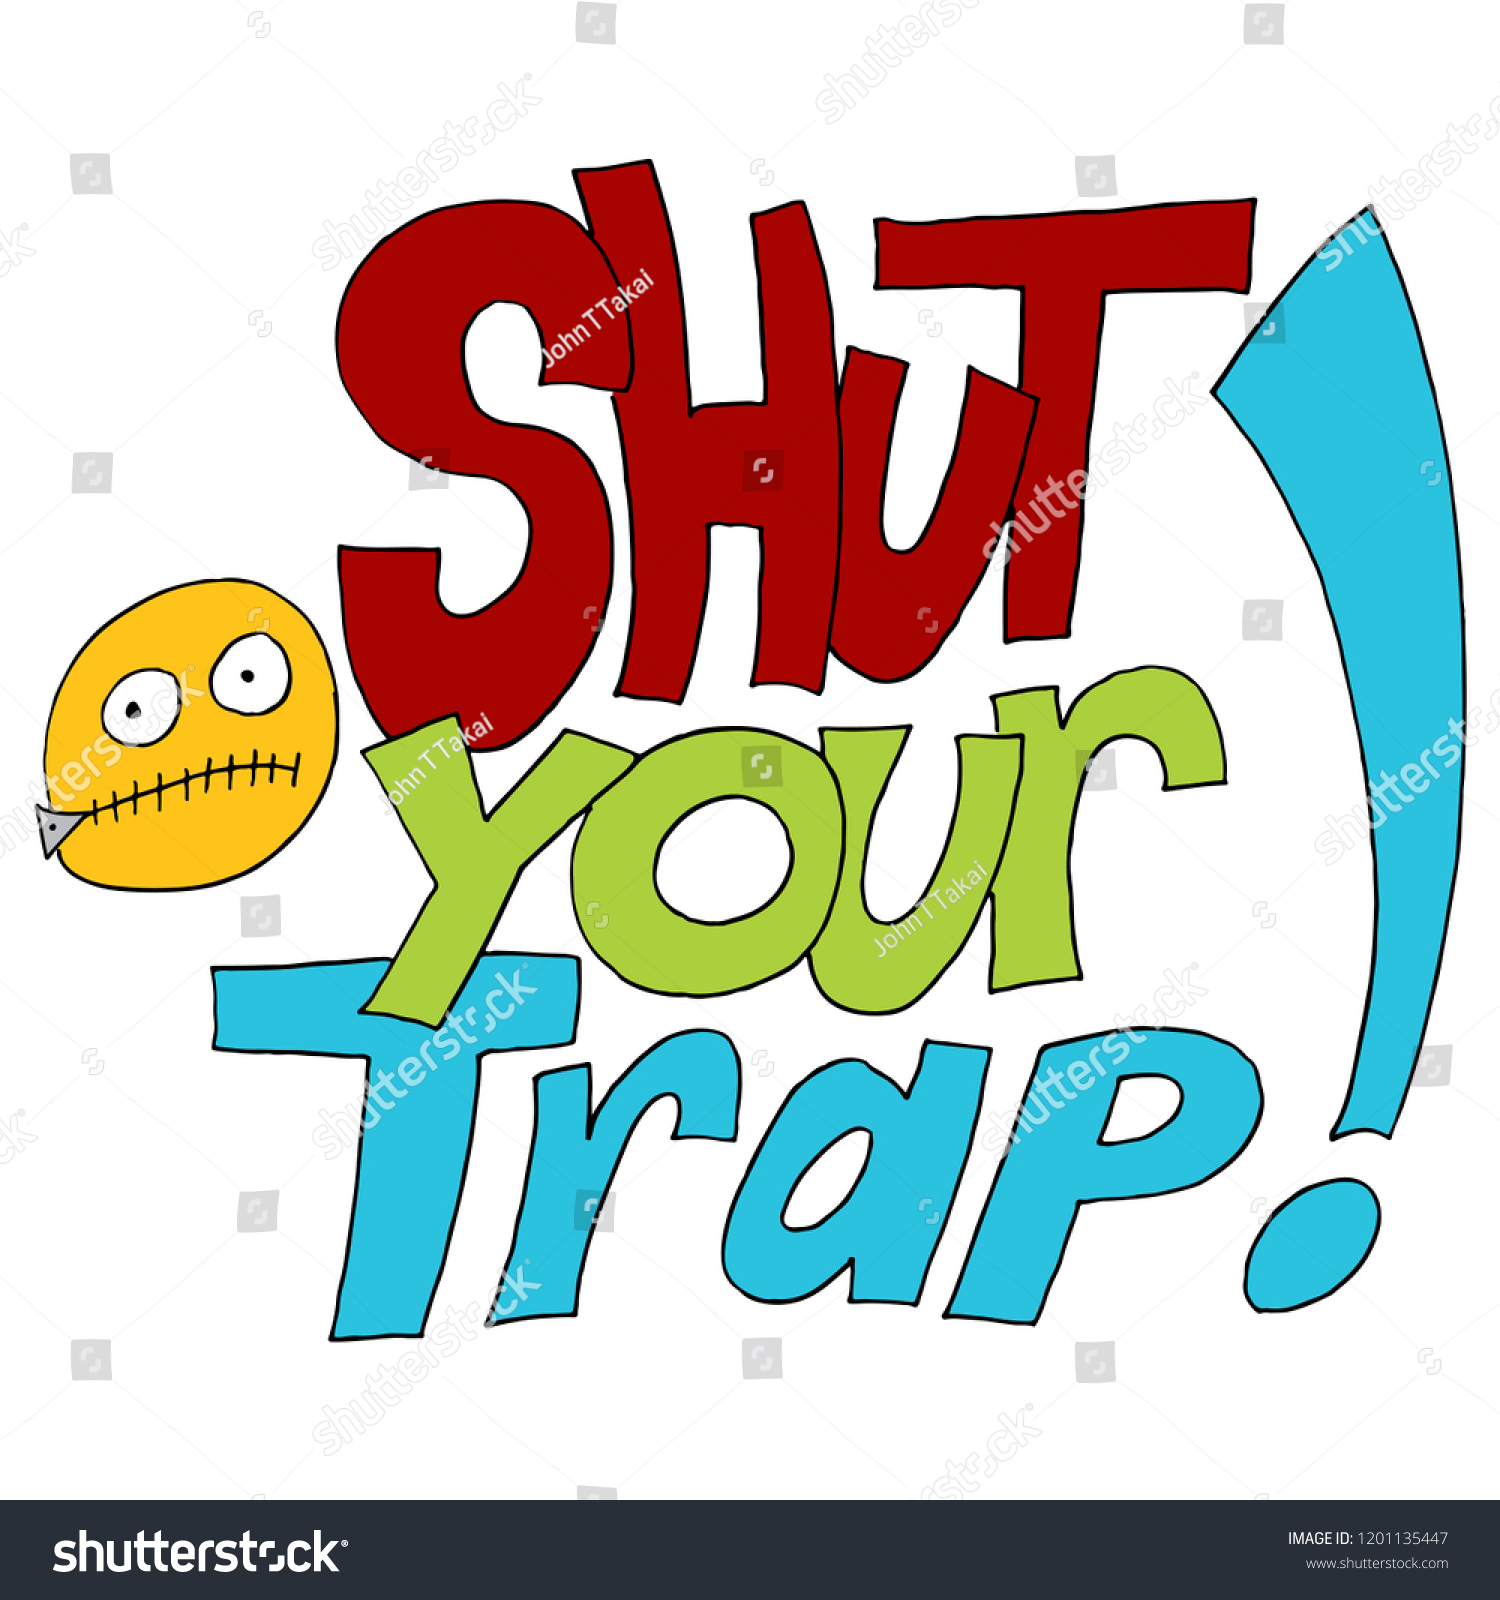 Image Shut Your Trap Insult Words Stock Vector (Royalty Free